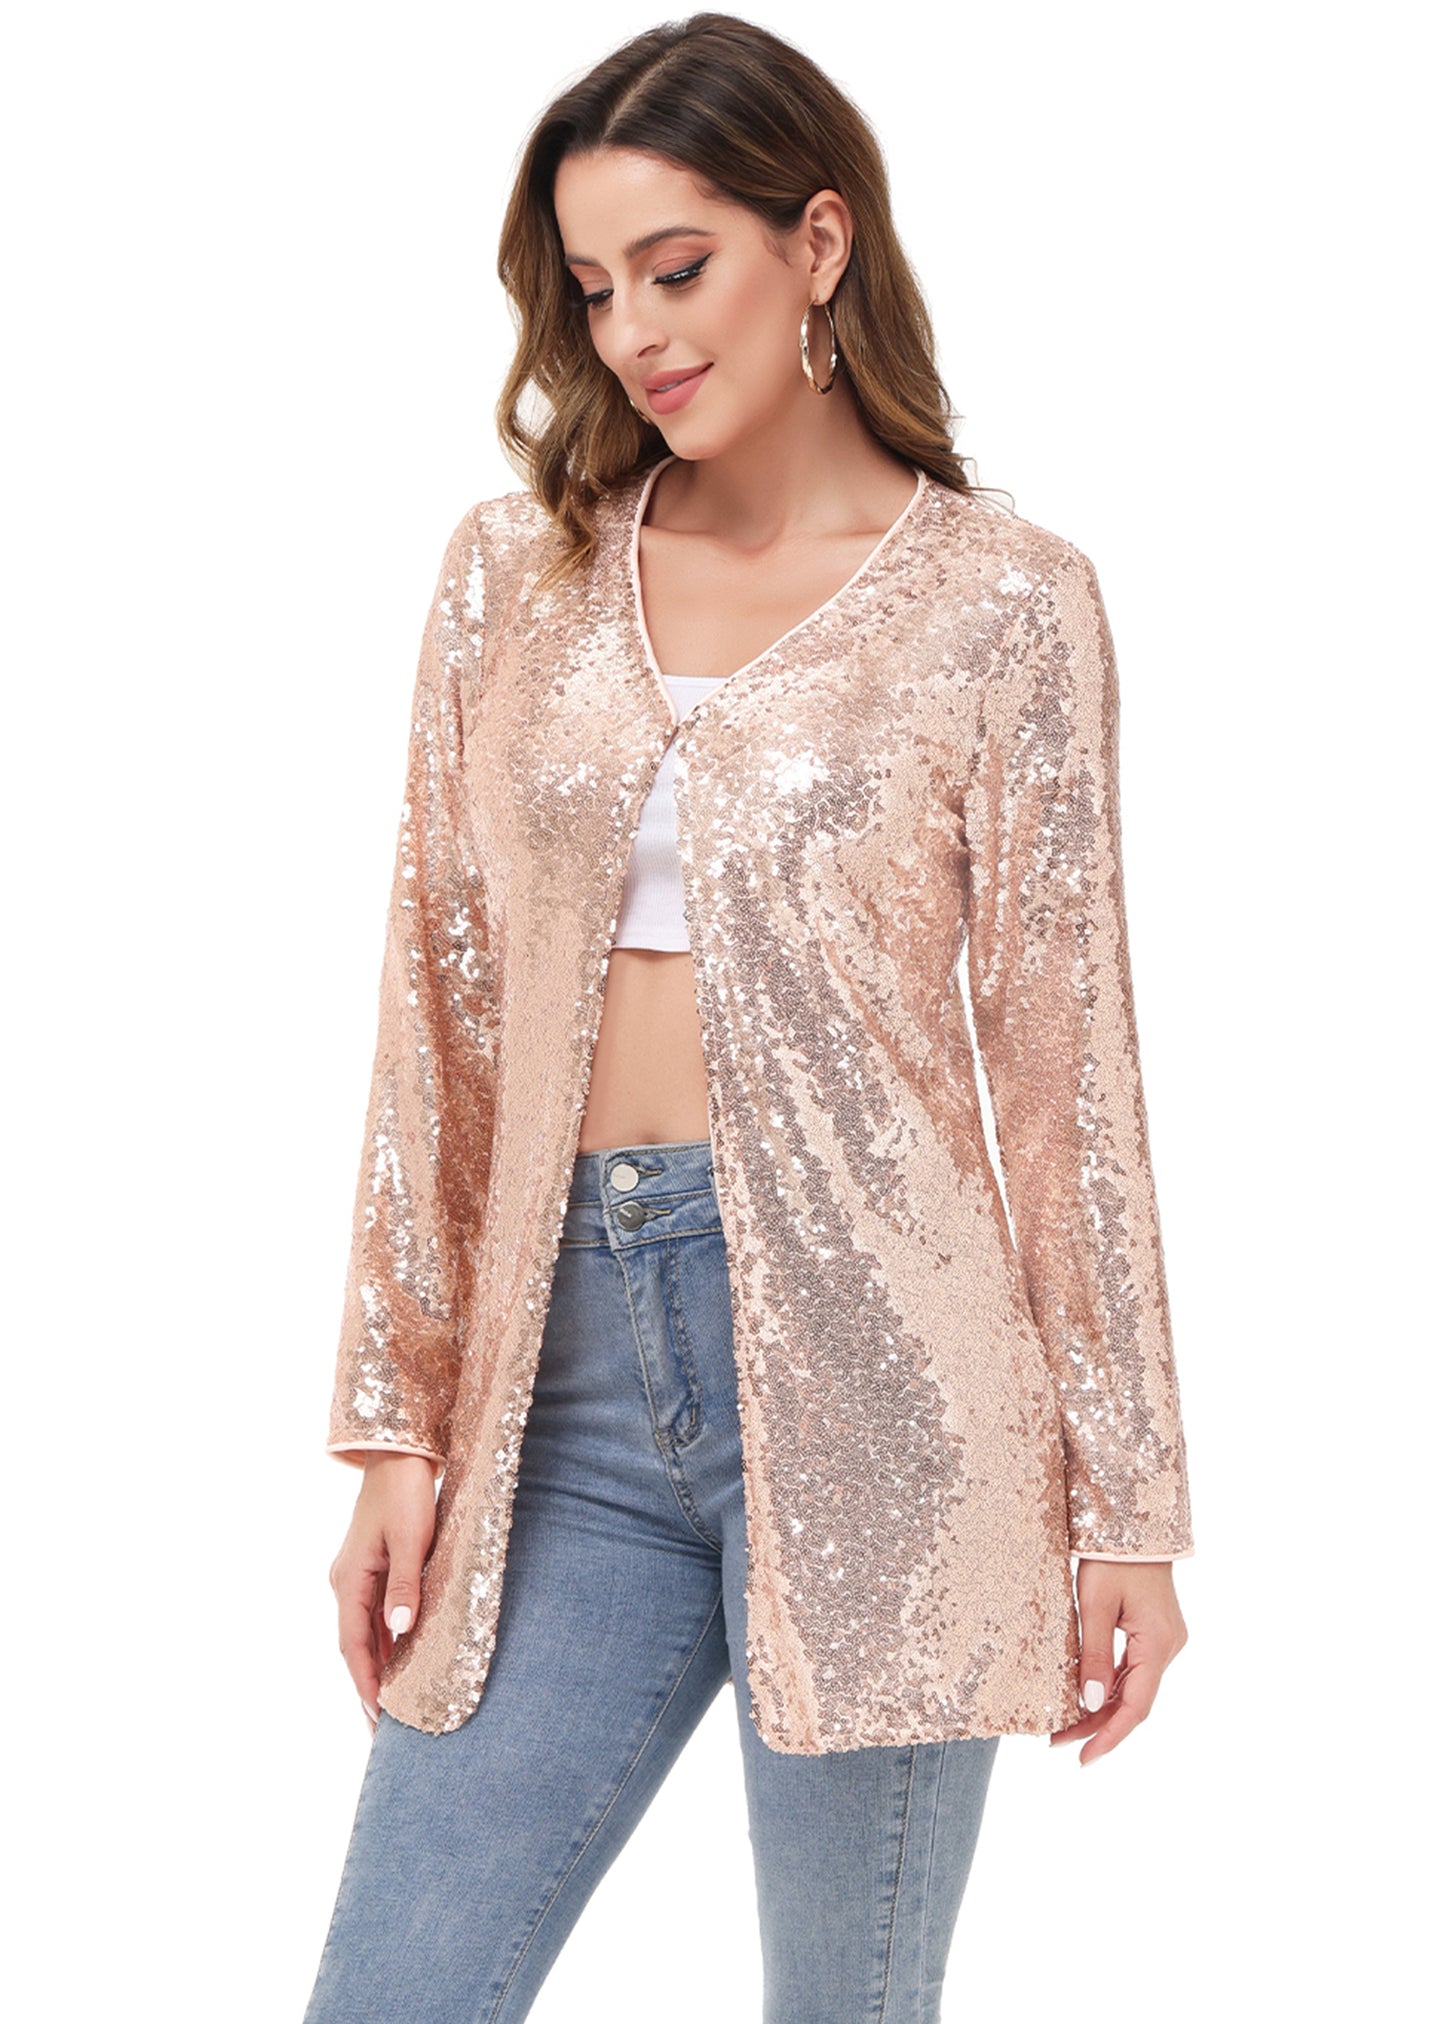 Sequin Open Front Cocktail Outerwear Jacket